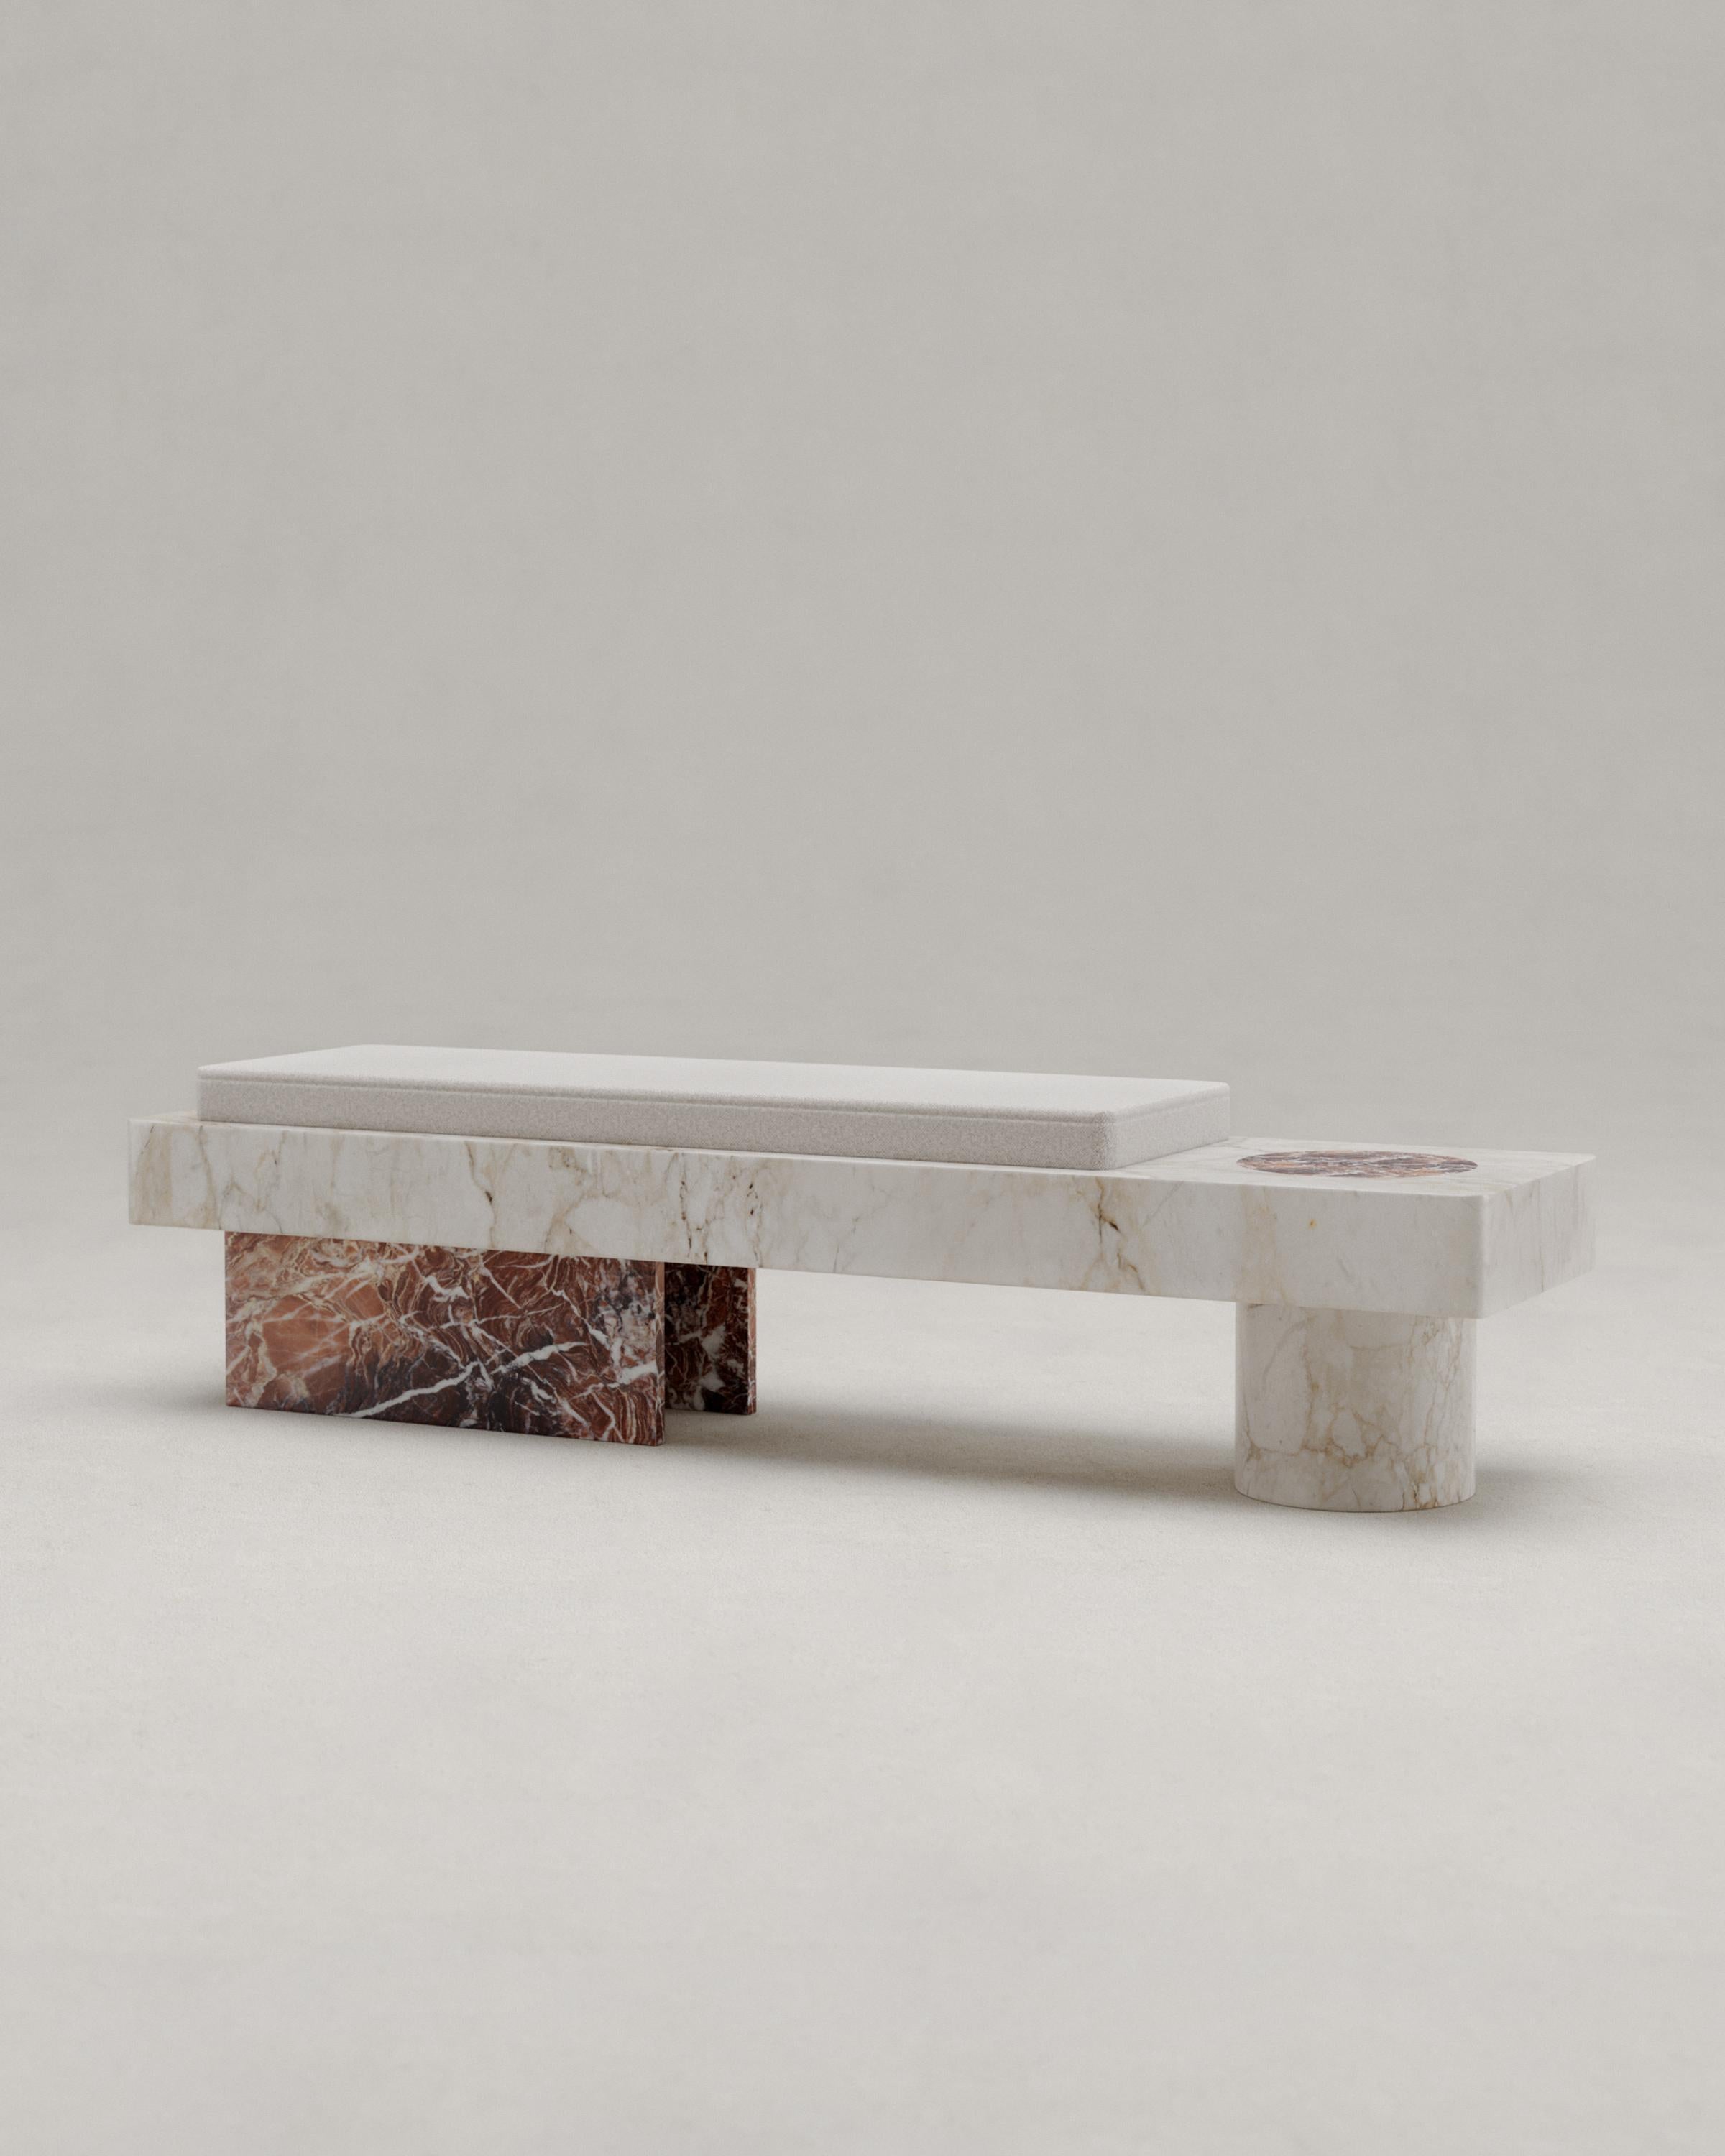 Salvante BS1 bench by Piotr Dabrowa
Unique Piece
Dimensions: W 160 x D 40 x H 40 cm
Materials: Calacatta marble, Rosa Peralba marble.
Also available: Calacatta Viola marble, walnut burl.

Salvante collection is a play between shapes, materials